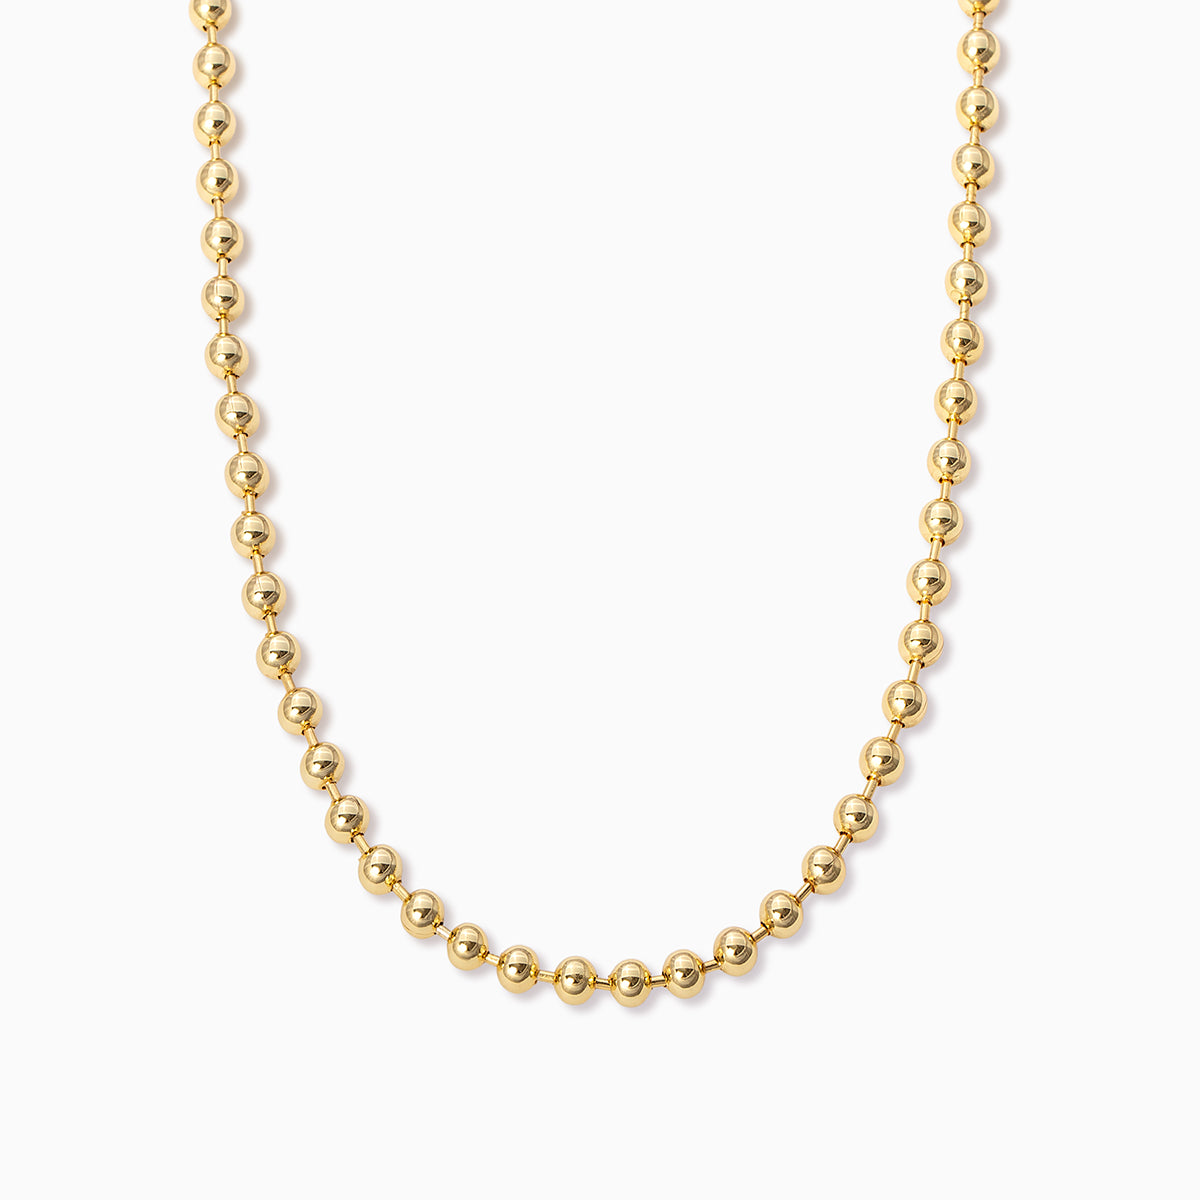 Ball Chain Necklace | Gold | Product Image | Uncommon James